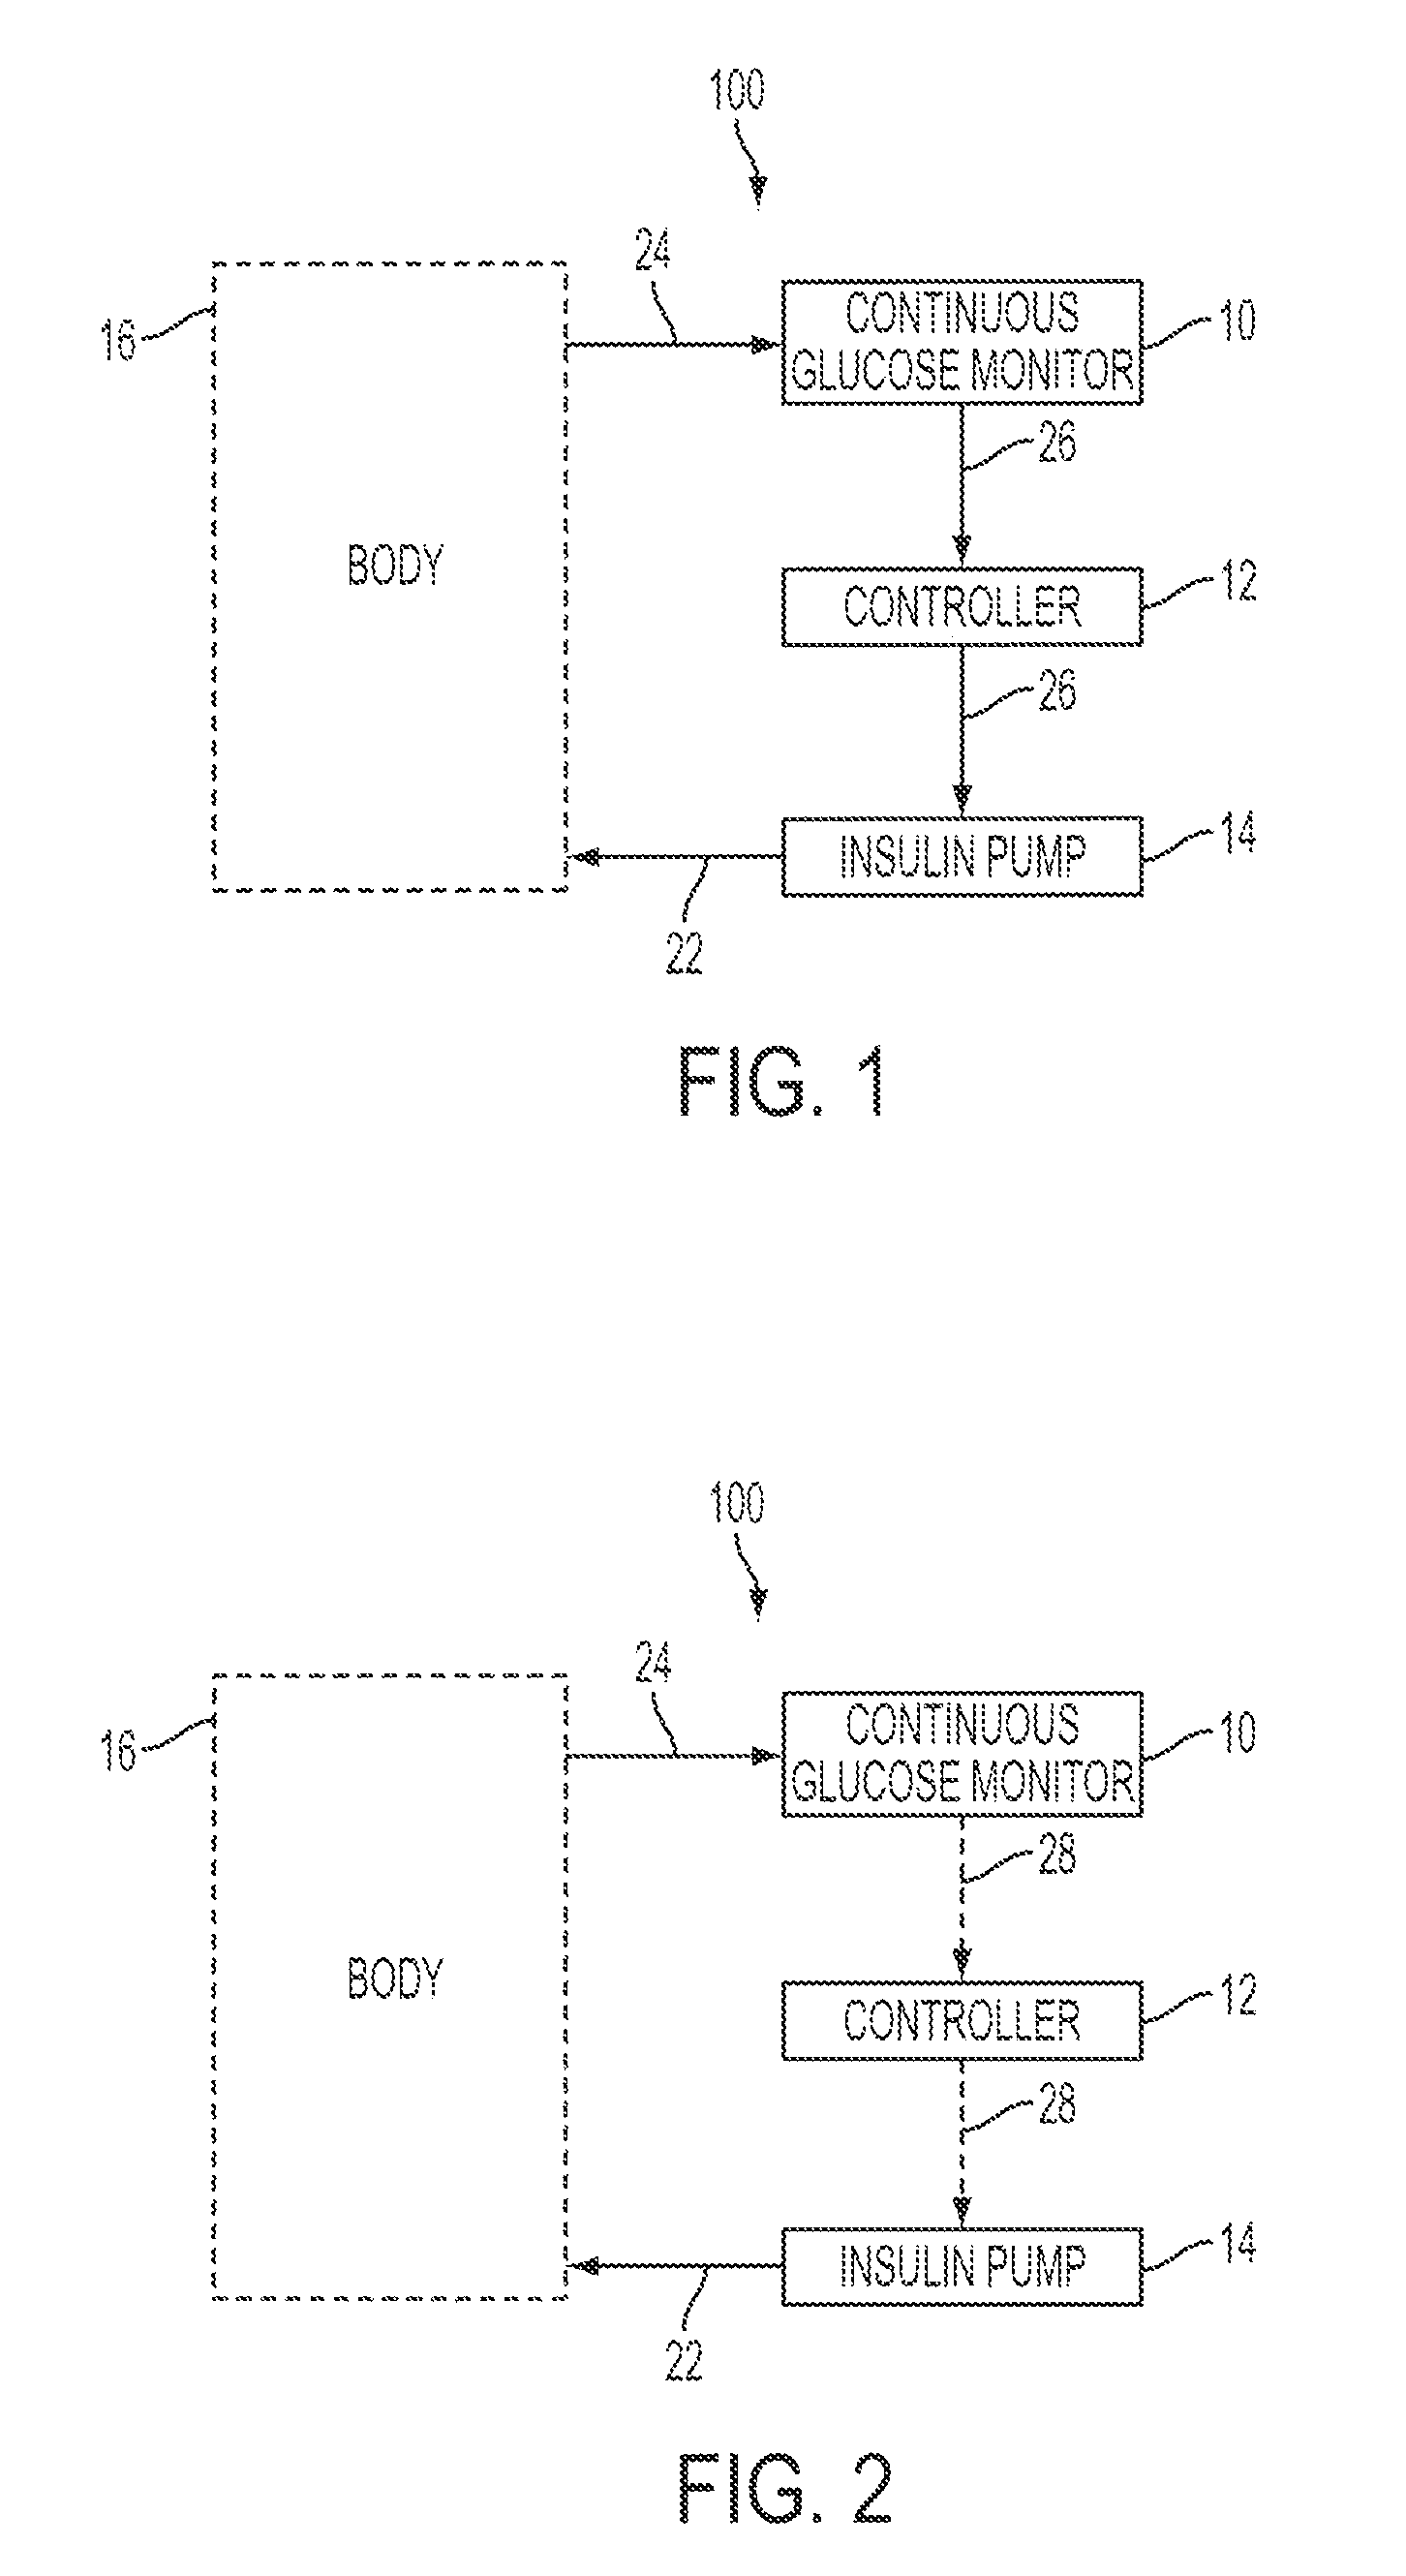 Predictive control based system and method for control of insulin delivery in diabetes using glucose sensing